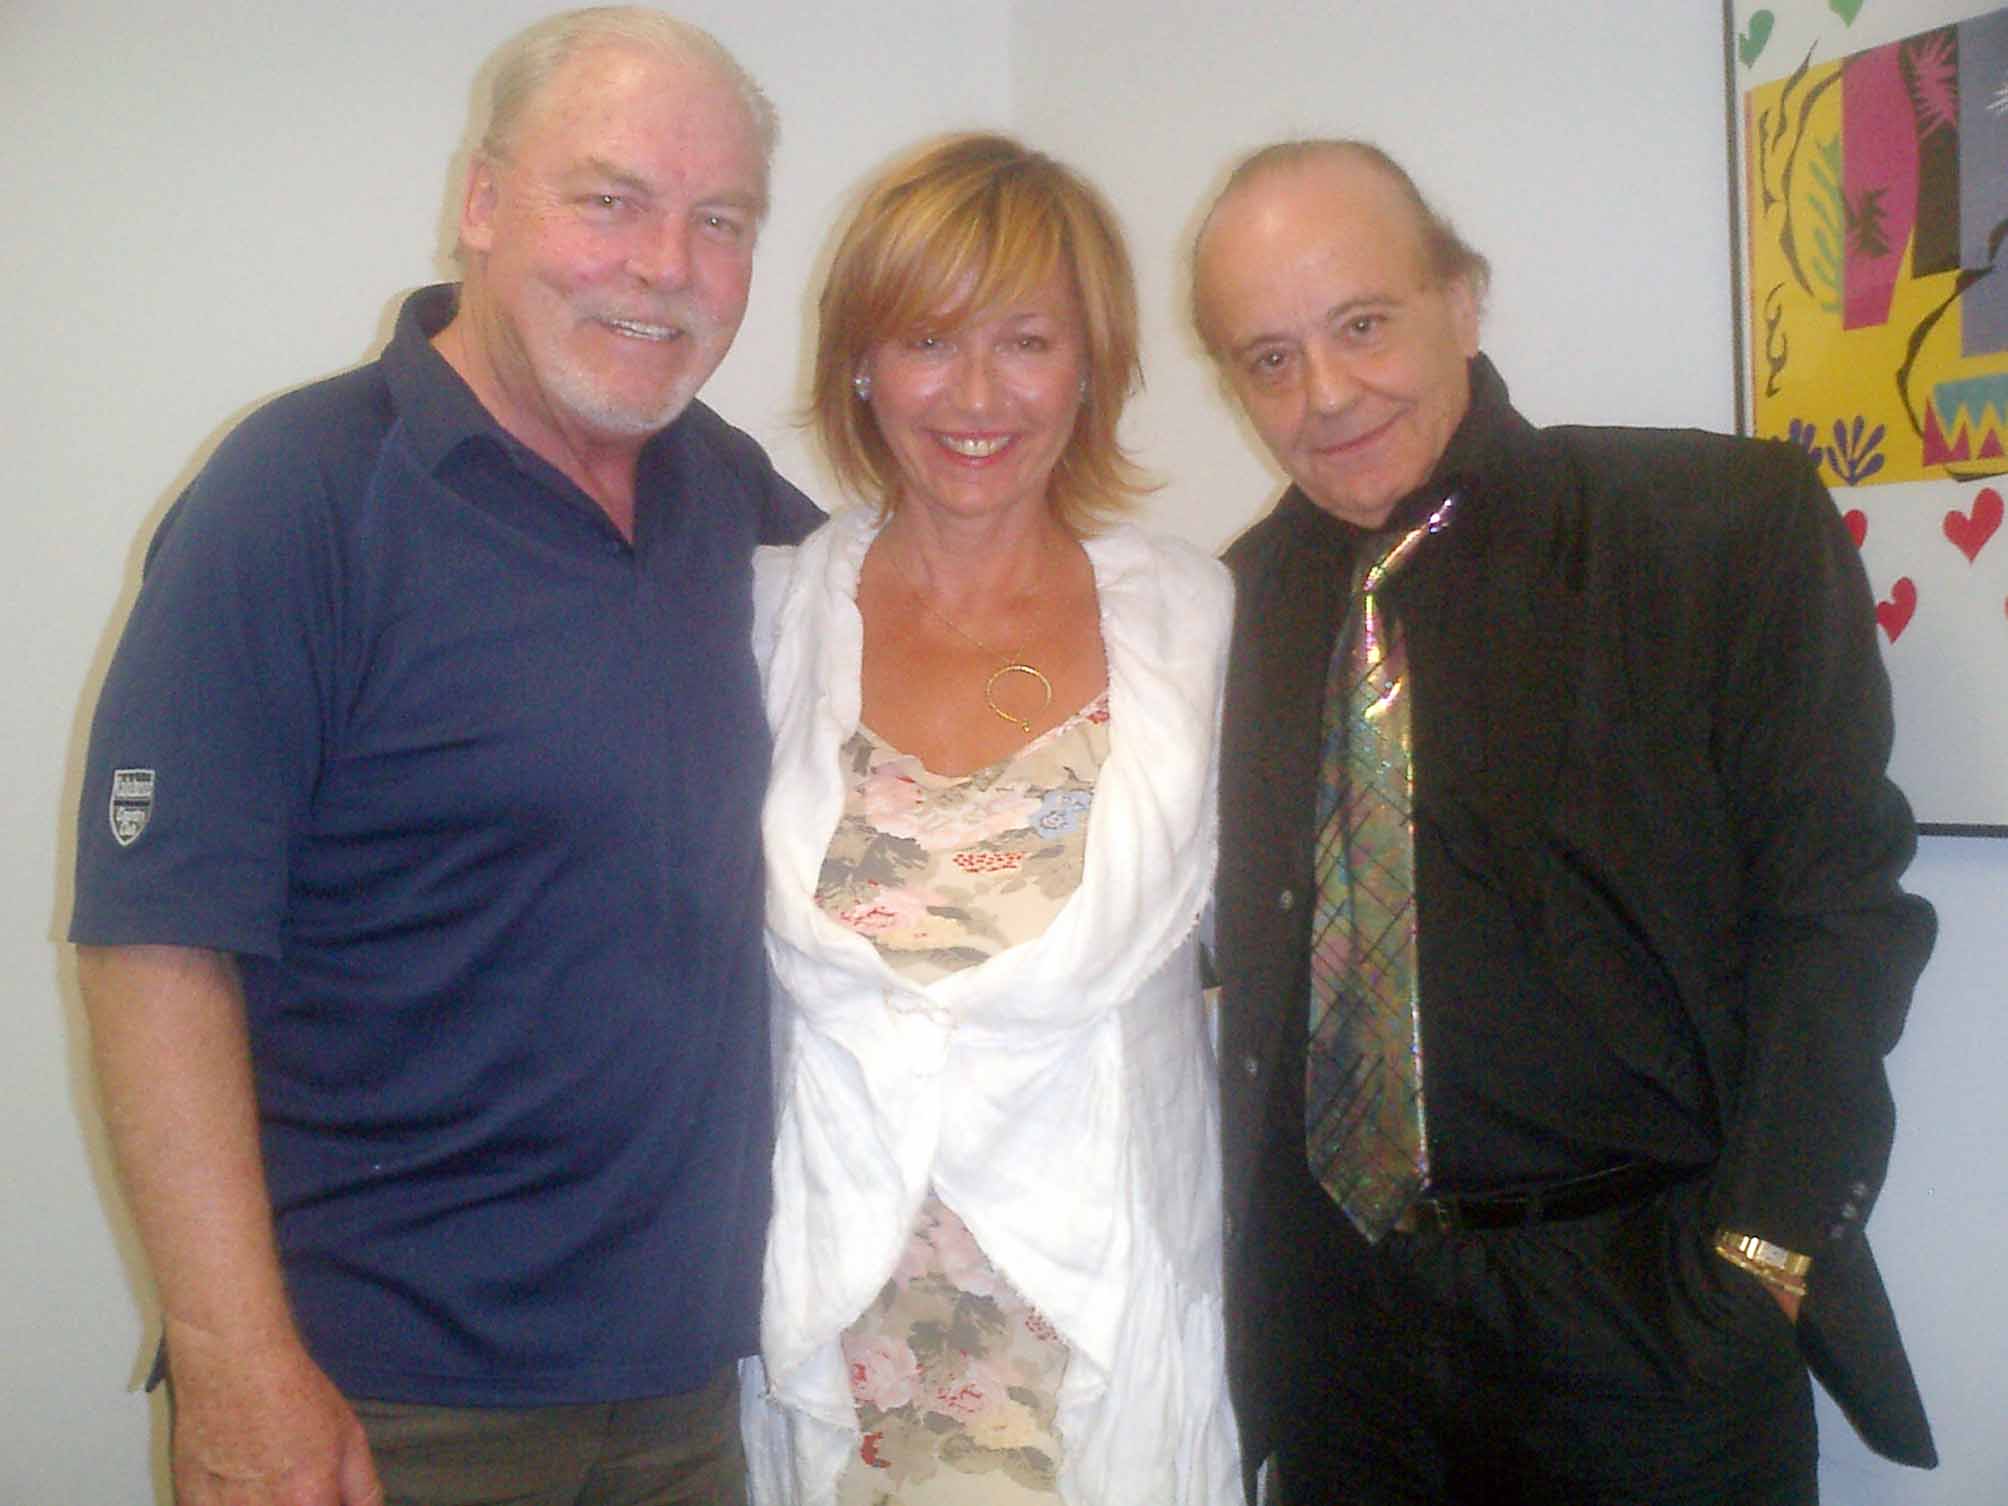 Jorg Bobsin and STACY KEACH with wife Malgosia for 